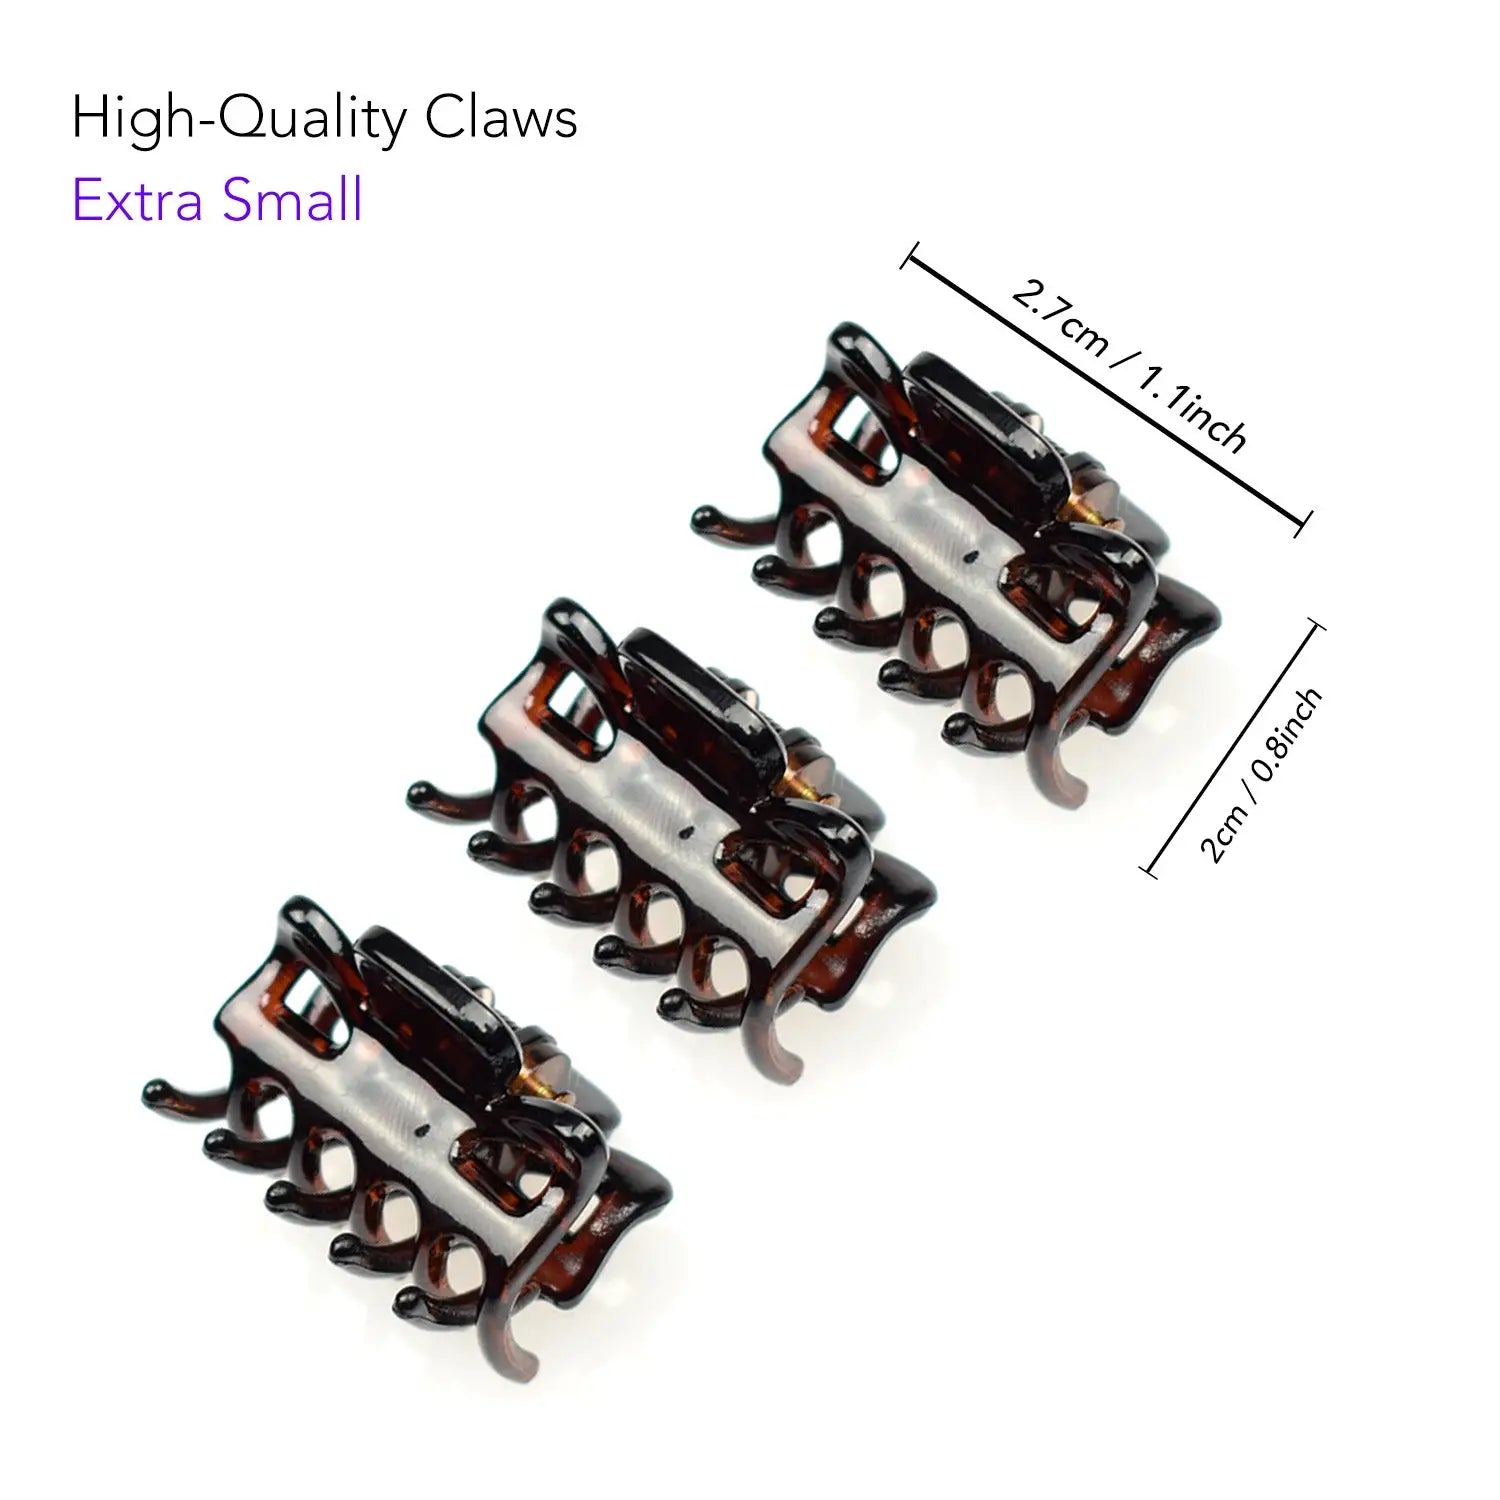 2pcs / lot high quality black brown plastic hair clip clips for women hair extensions from Essential Hair Claw Clips Set, 9pcs - 2.7cm